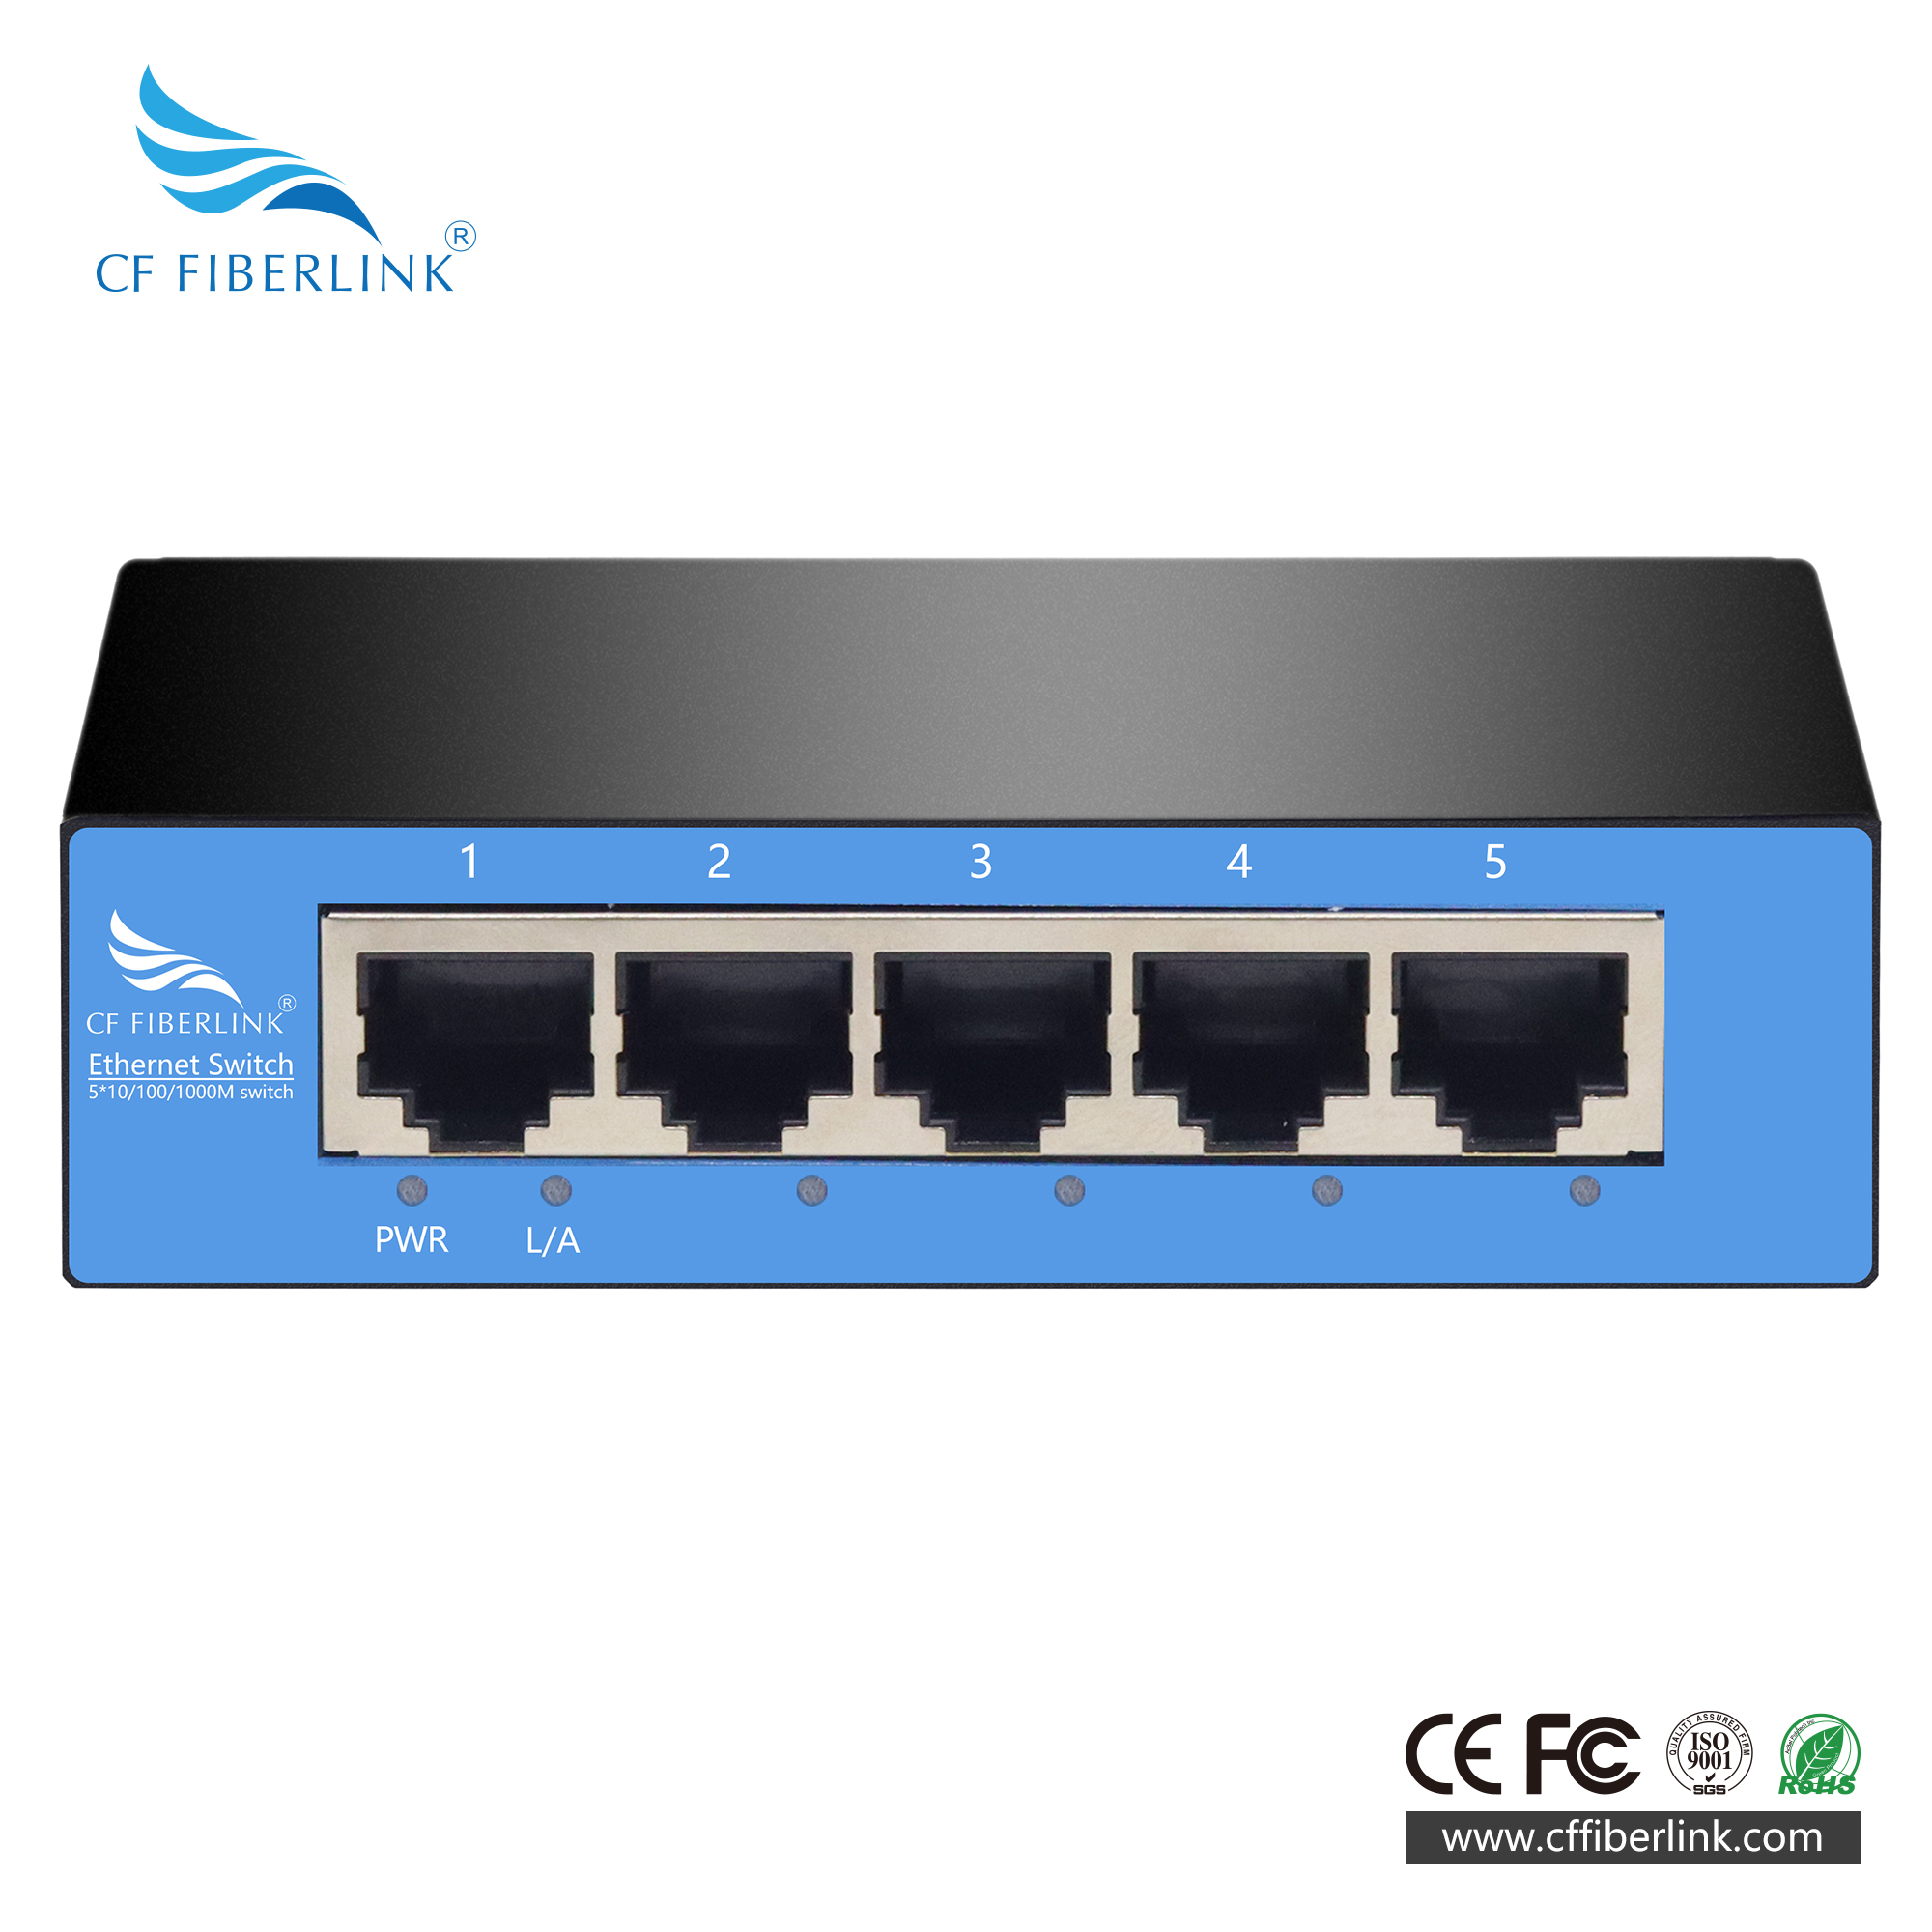 5-port 10/100/1000M Ethernet Switch Featured Image